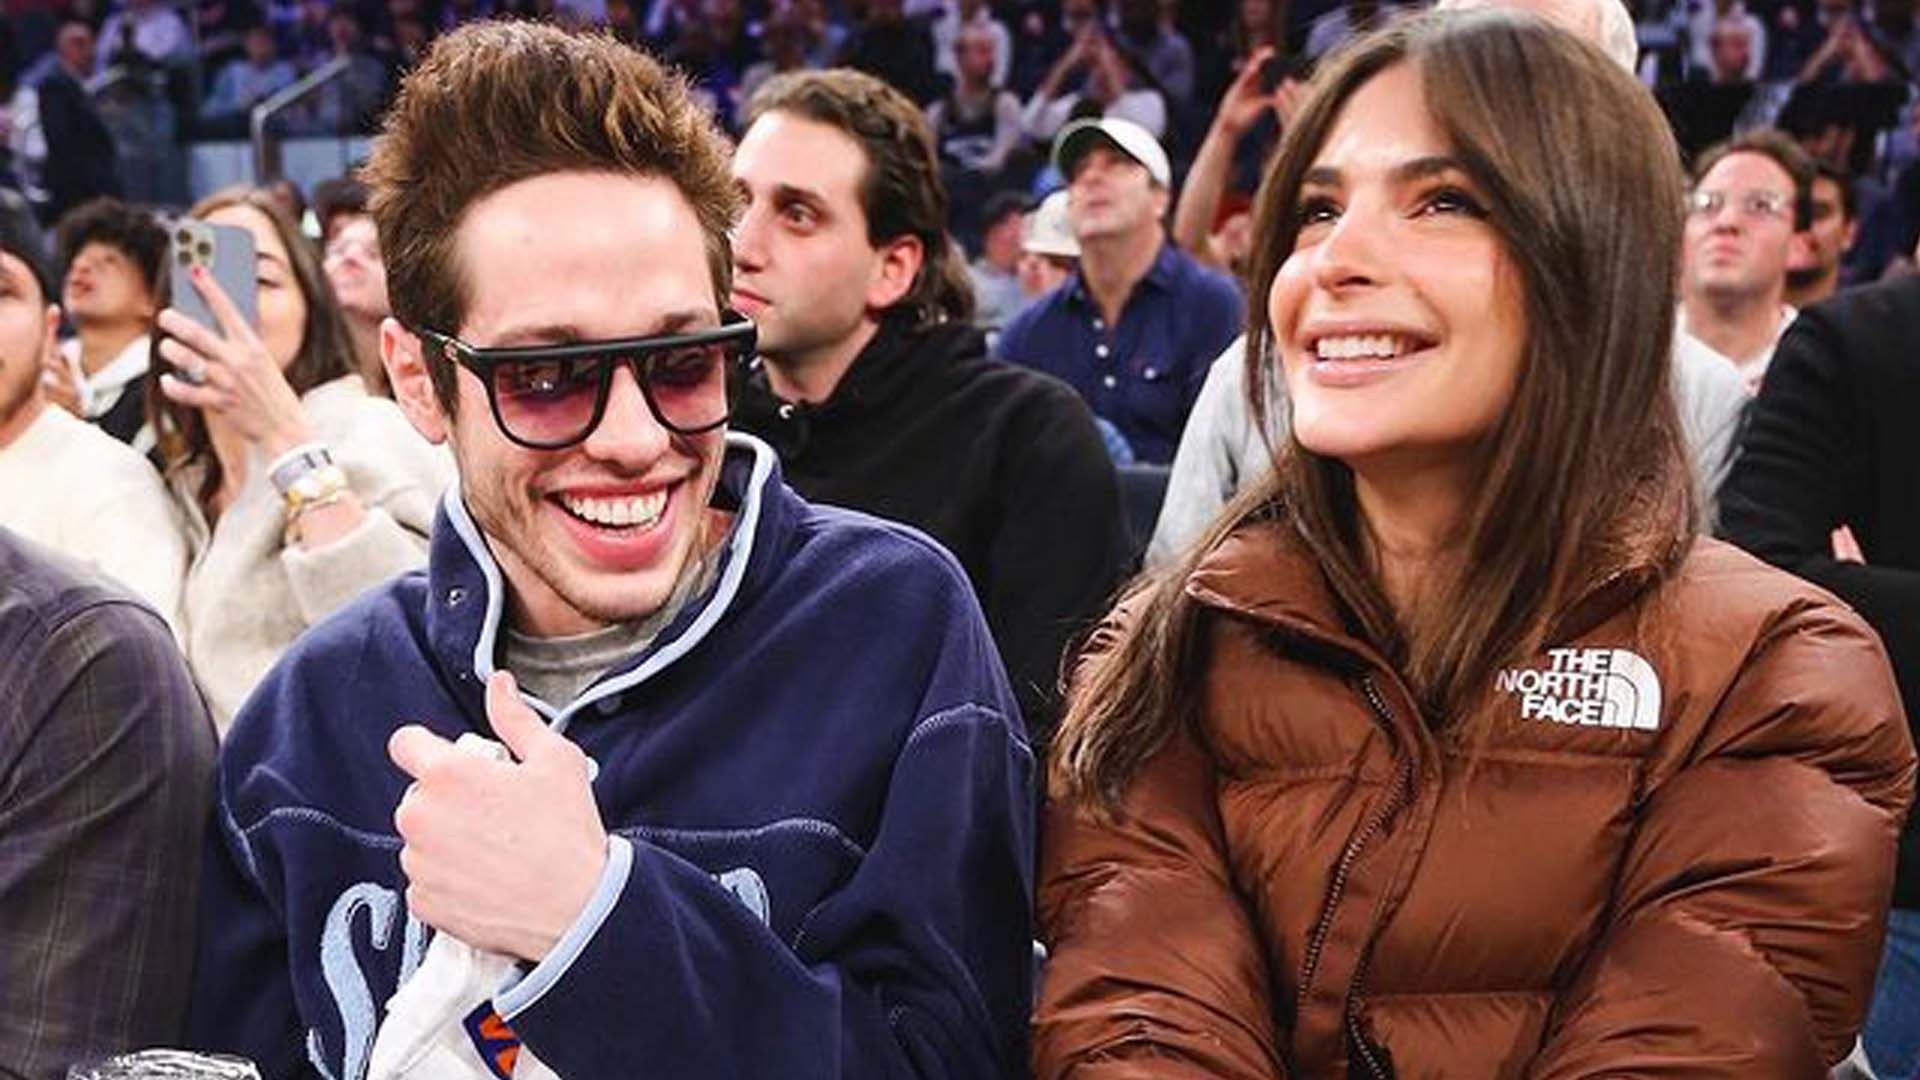 Pete Davidson and Emily Ratajkowski Go Public For the First Time Since Sparking Romance Rumors